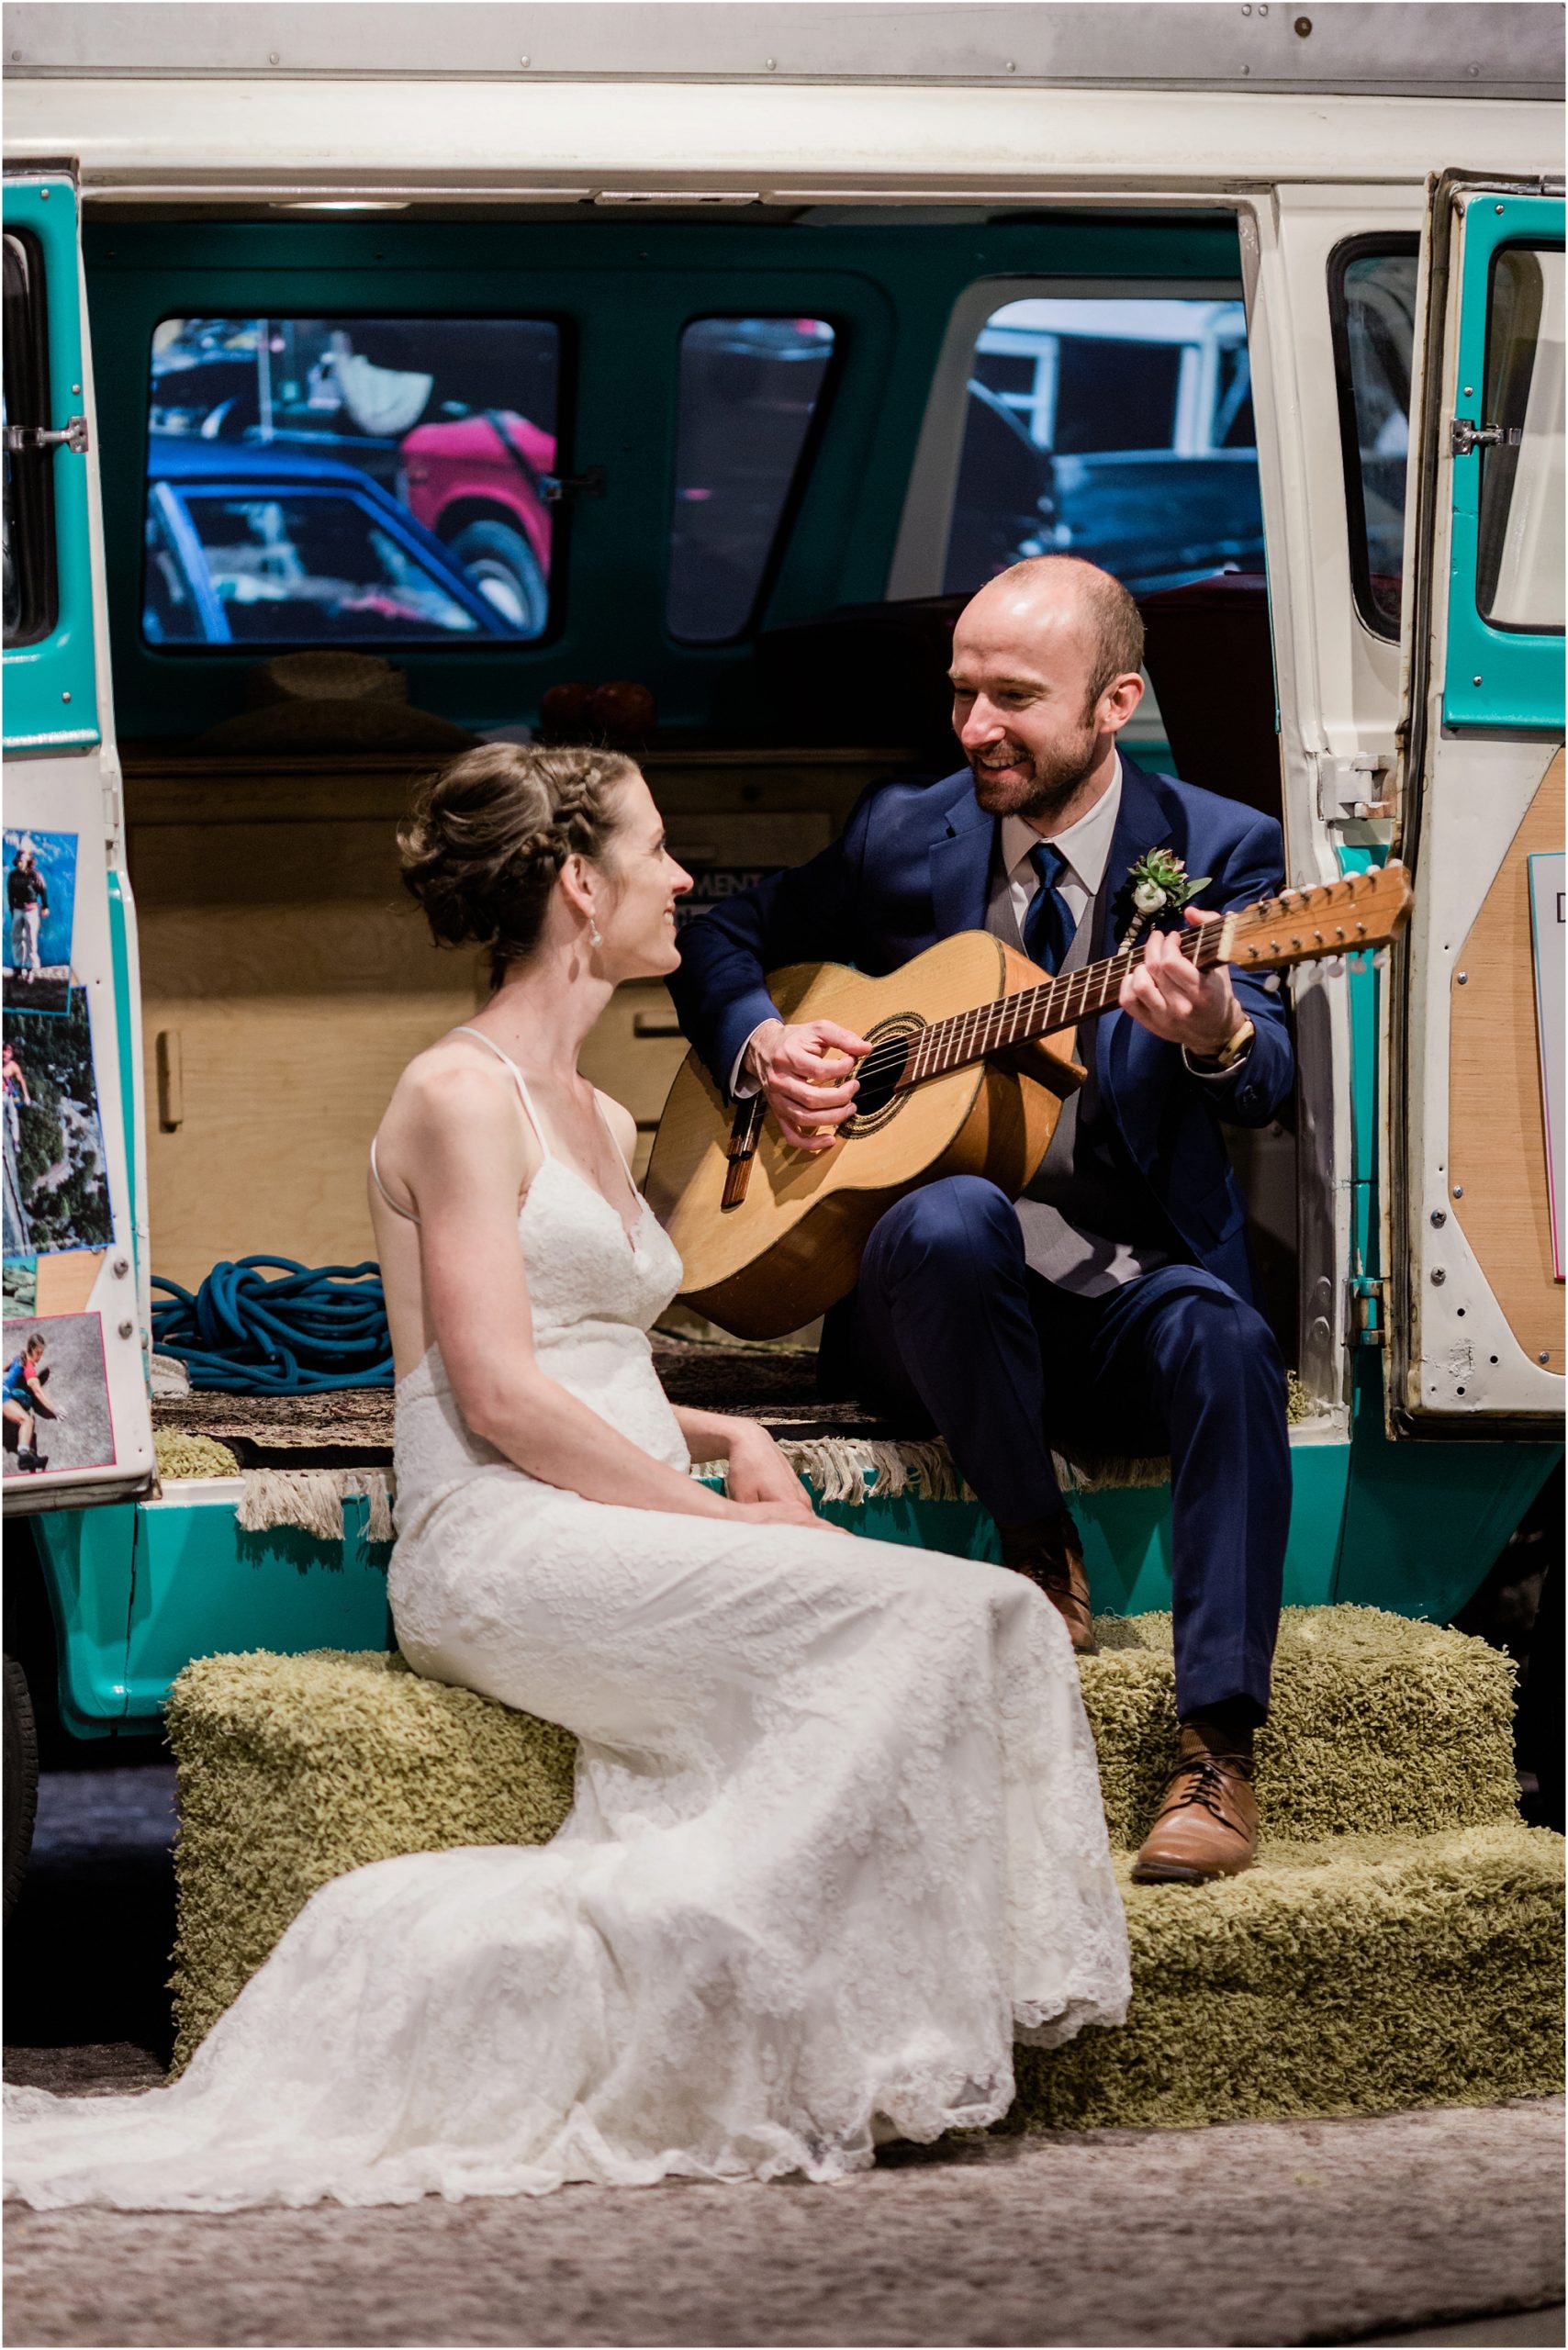 A vintage VW bus with the groom playing guitar is such a neat prop for any rustic wedding in Bend, OR. | Erica Swantek Photography